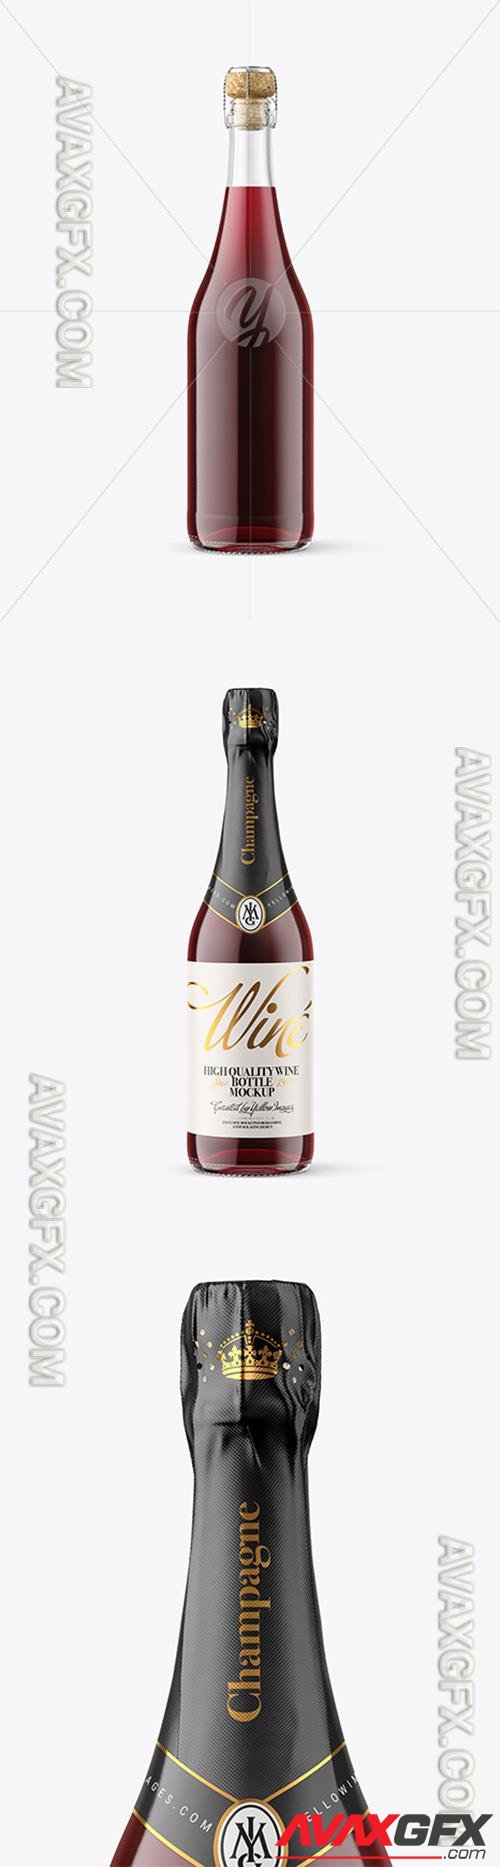 Clear Glass Bottle with Red Champagne Mockup 88506 TIF